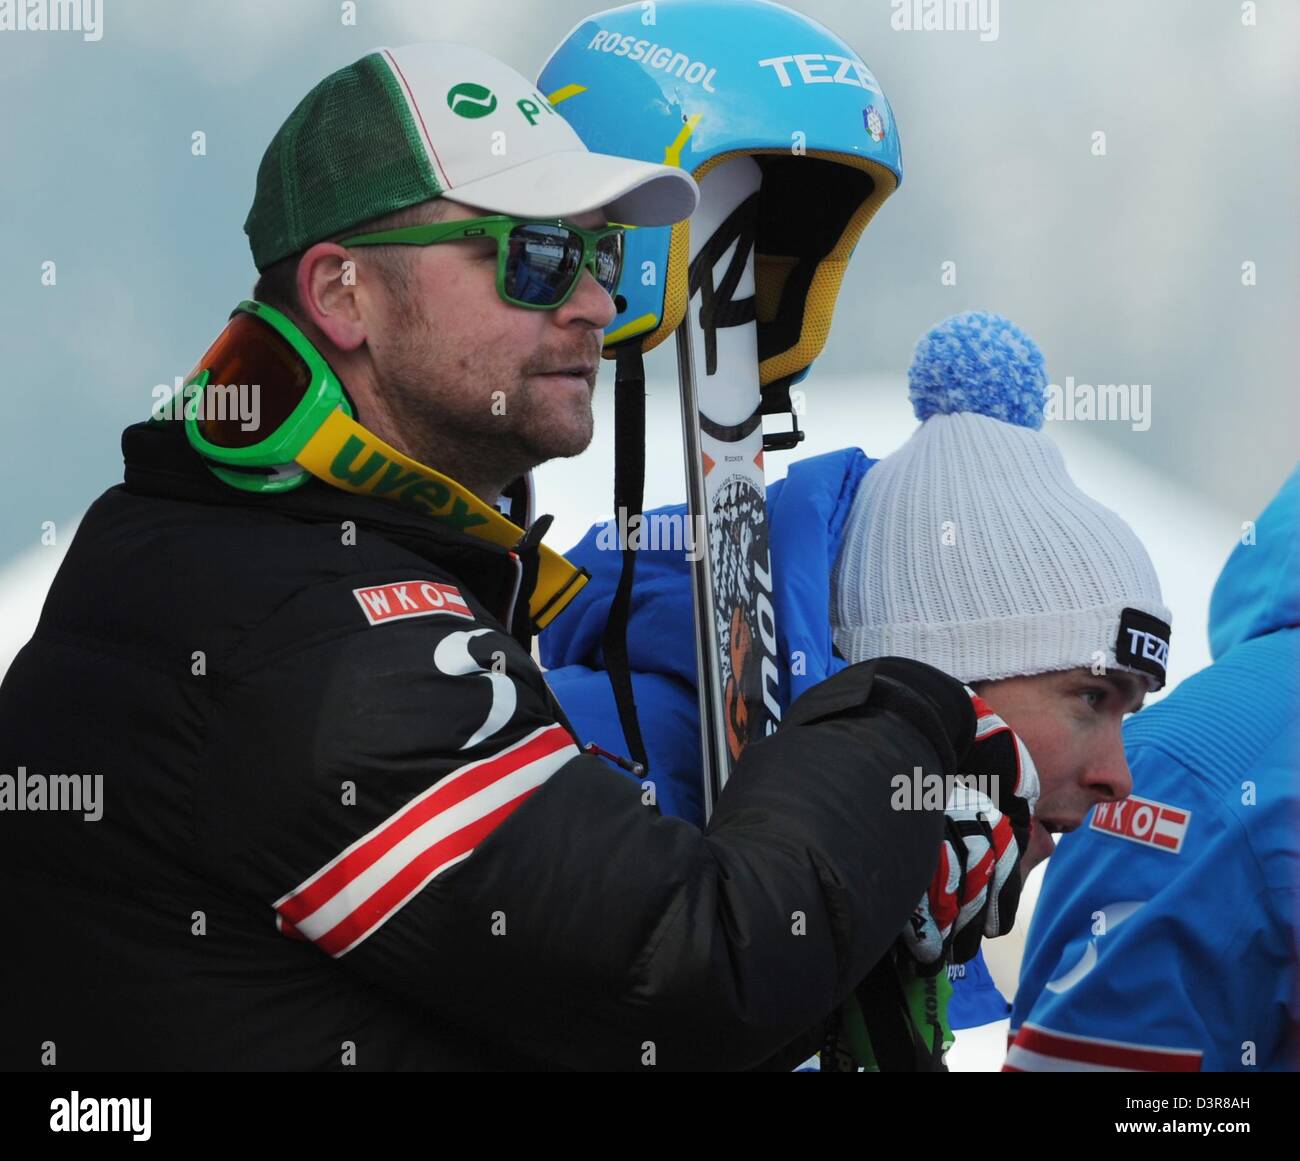 Garmisch-Partenkirchen, Germany. 23rd February 2013. Klaus Kroell (L) from Austria and Italien skier Christof Innerhofer follow the progress of thge race at the Alpine skiing world cup at the Kandahar ski slope in Garmisch-Partenkirchen, Germany, 23 February 2013. He won the world cup race. Photo: ANGELIKA WARMUTH Stock Photo